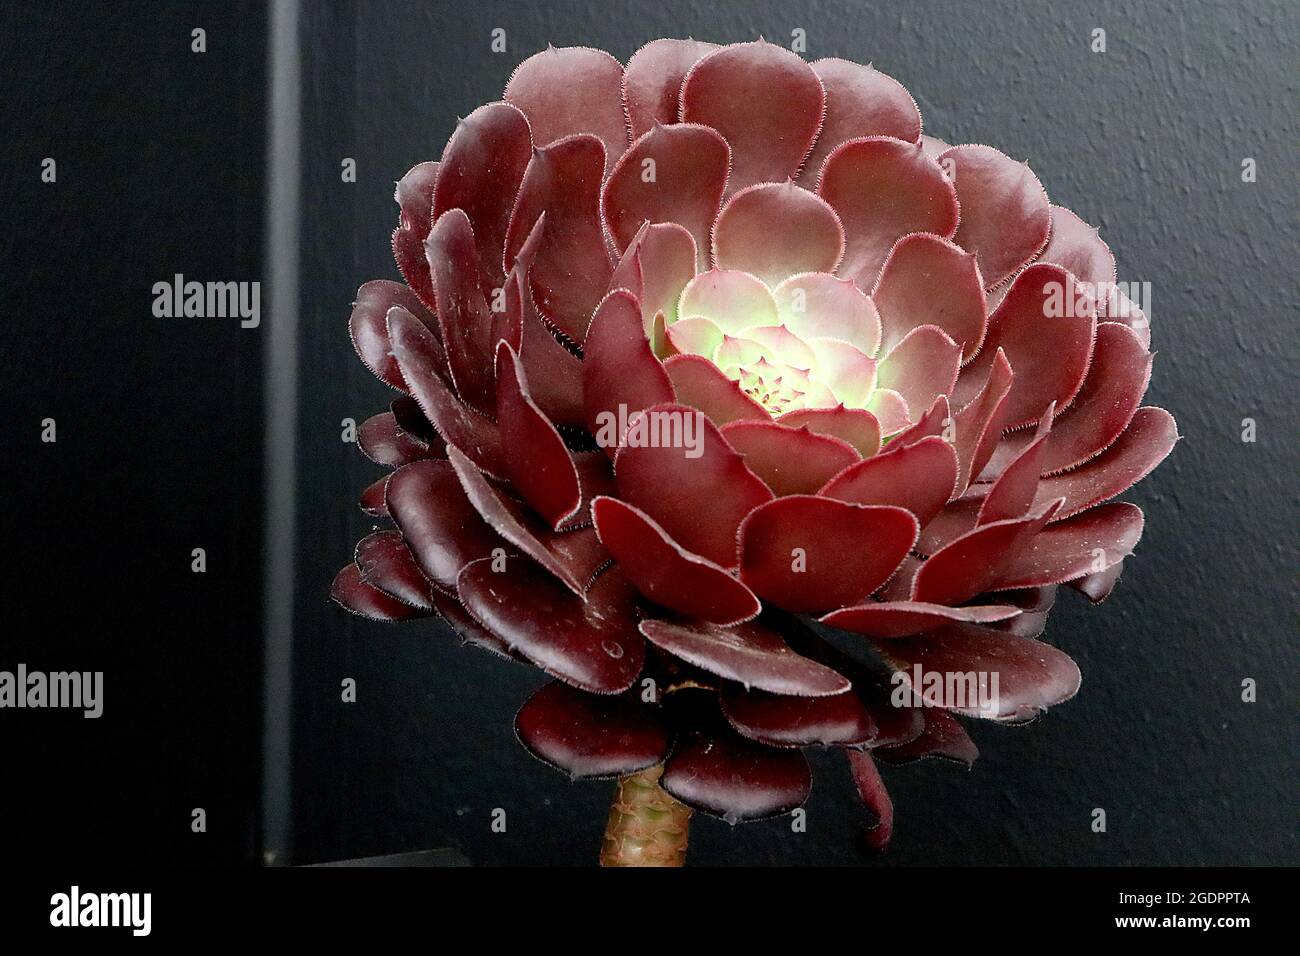 Aeonium ‘Bronze Teacup’ rosette of spoon-shaped bronze red leaves on thick stem, July, England, UK Stock Photo